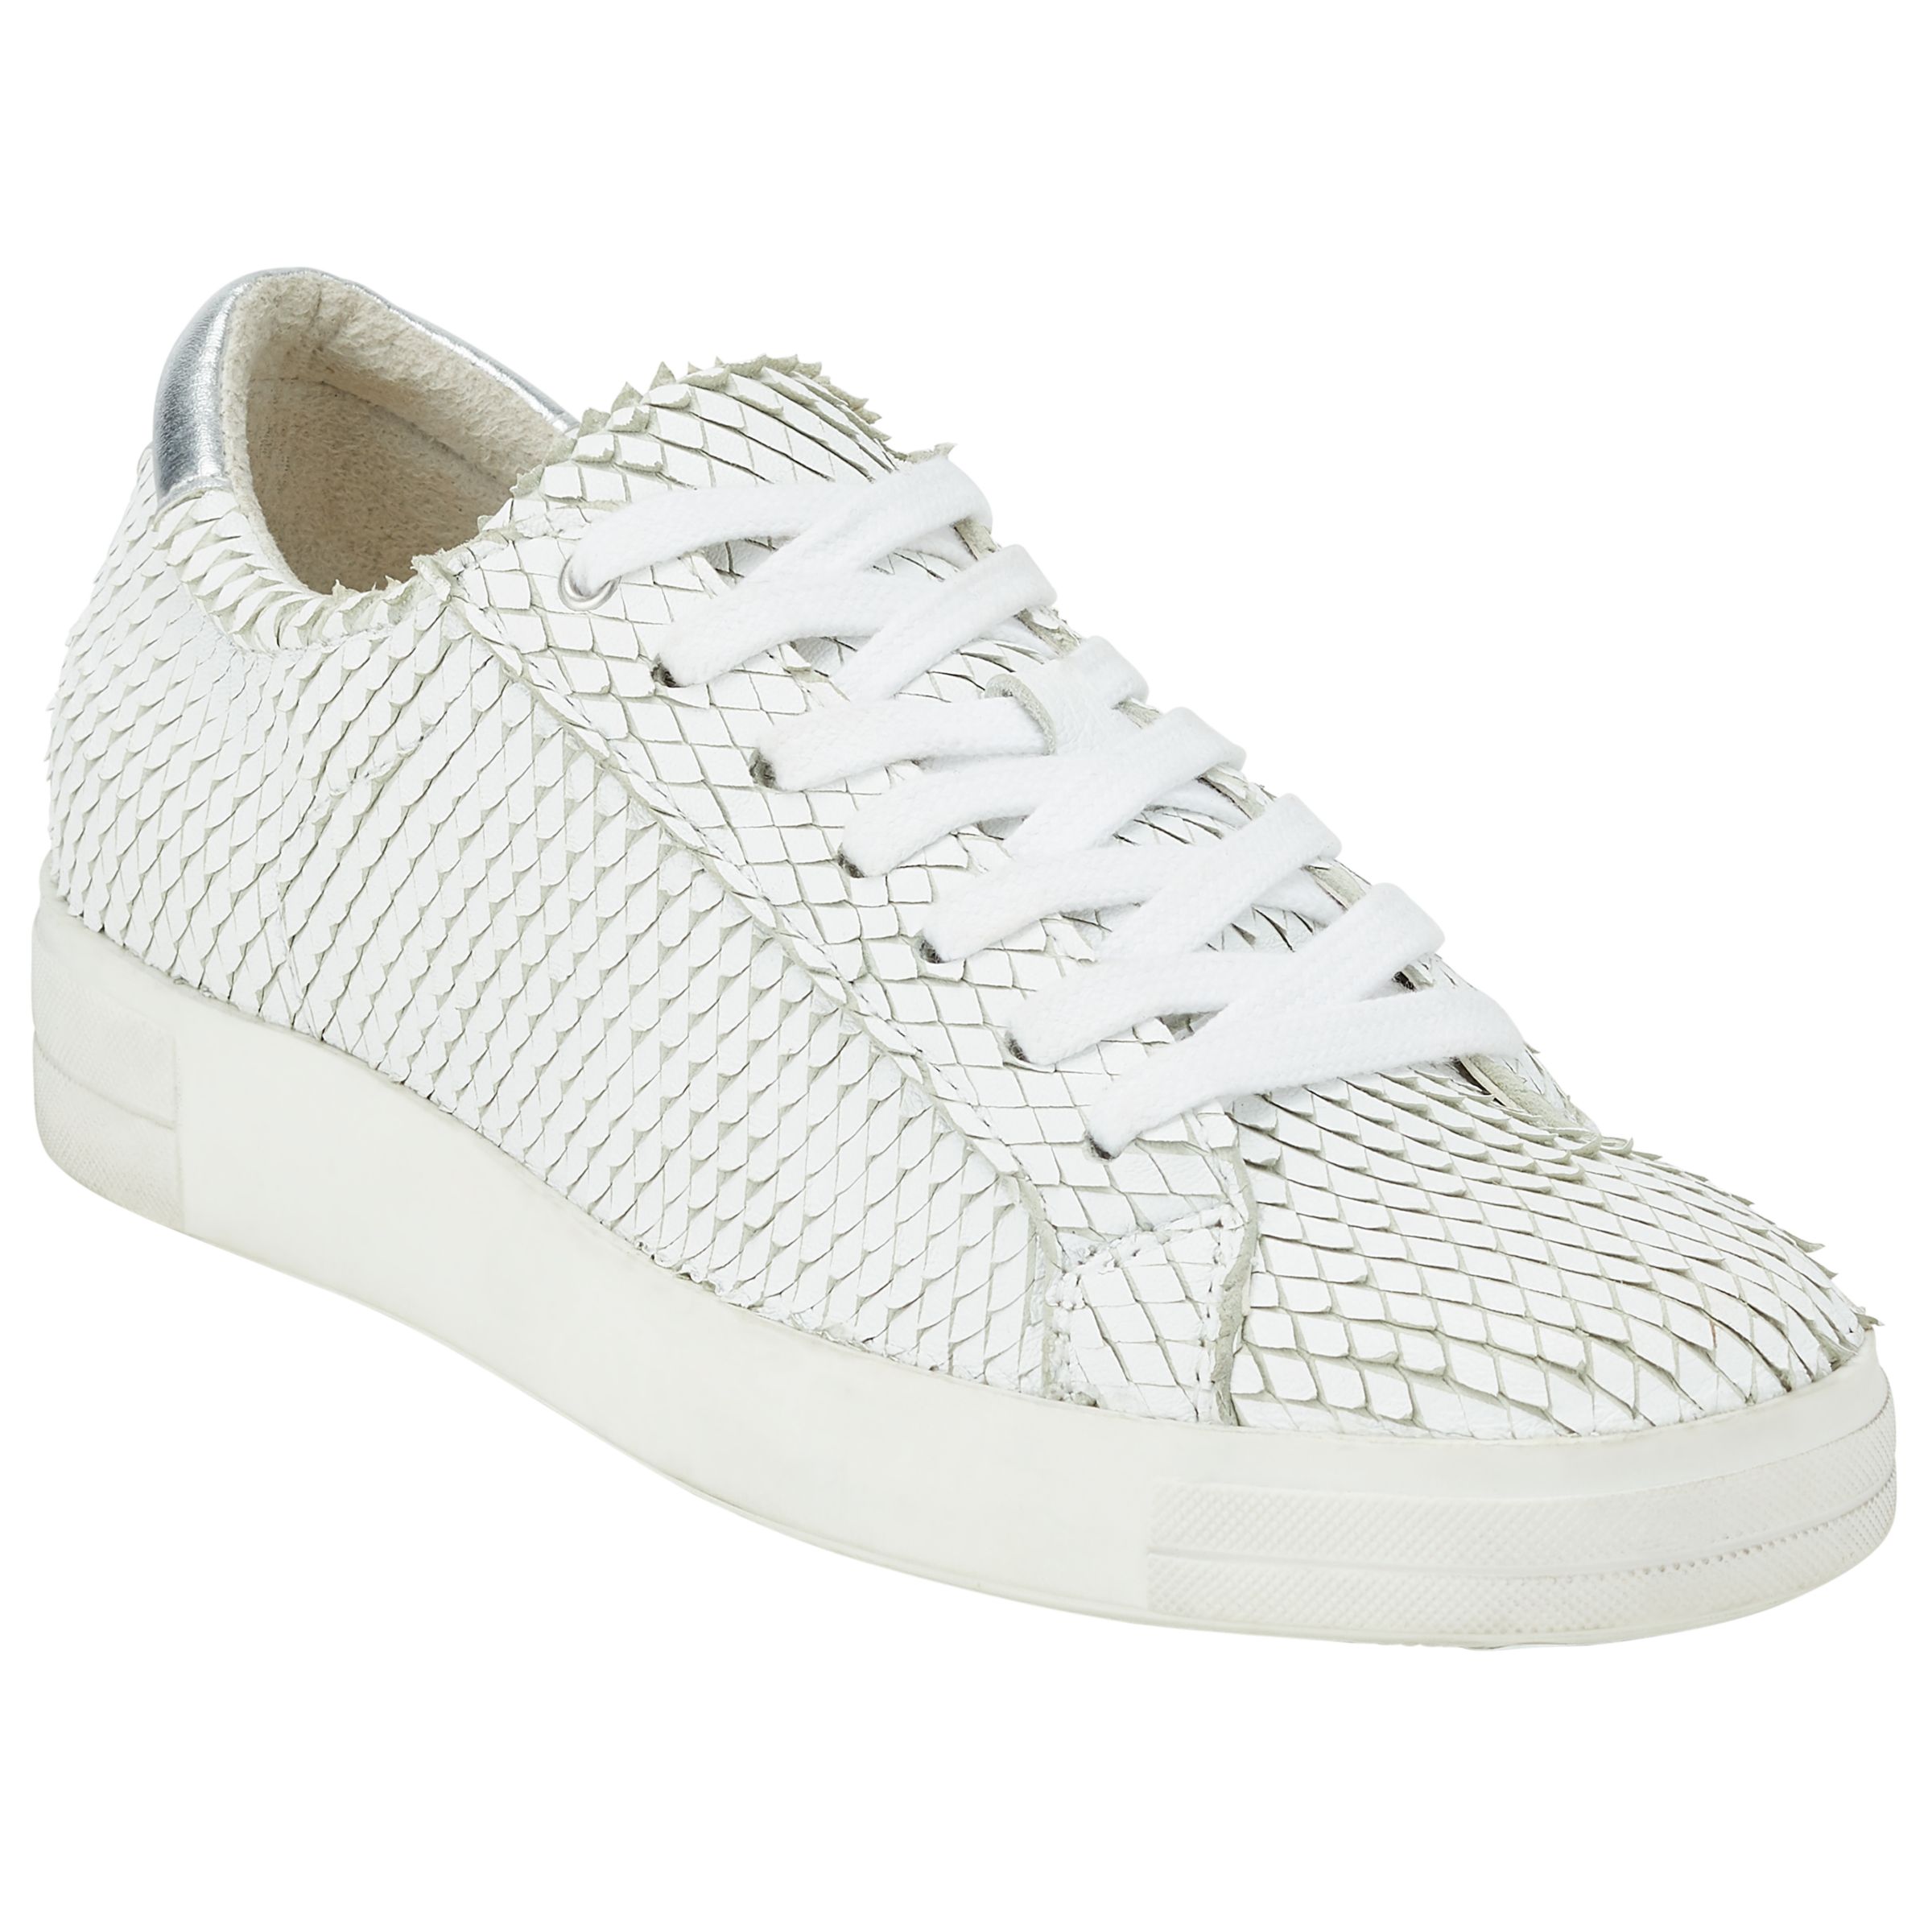 Kin Electra Textured Trainers, White